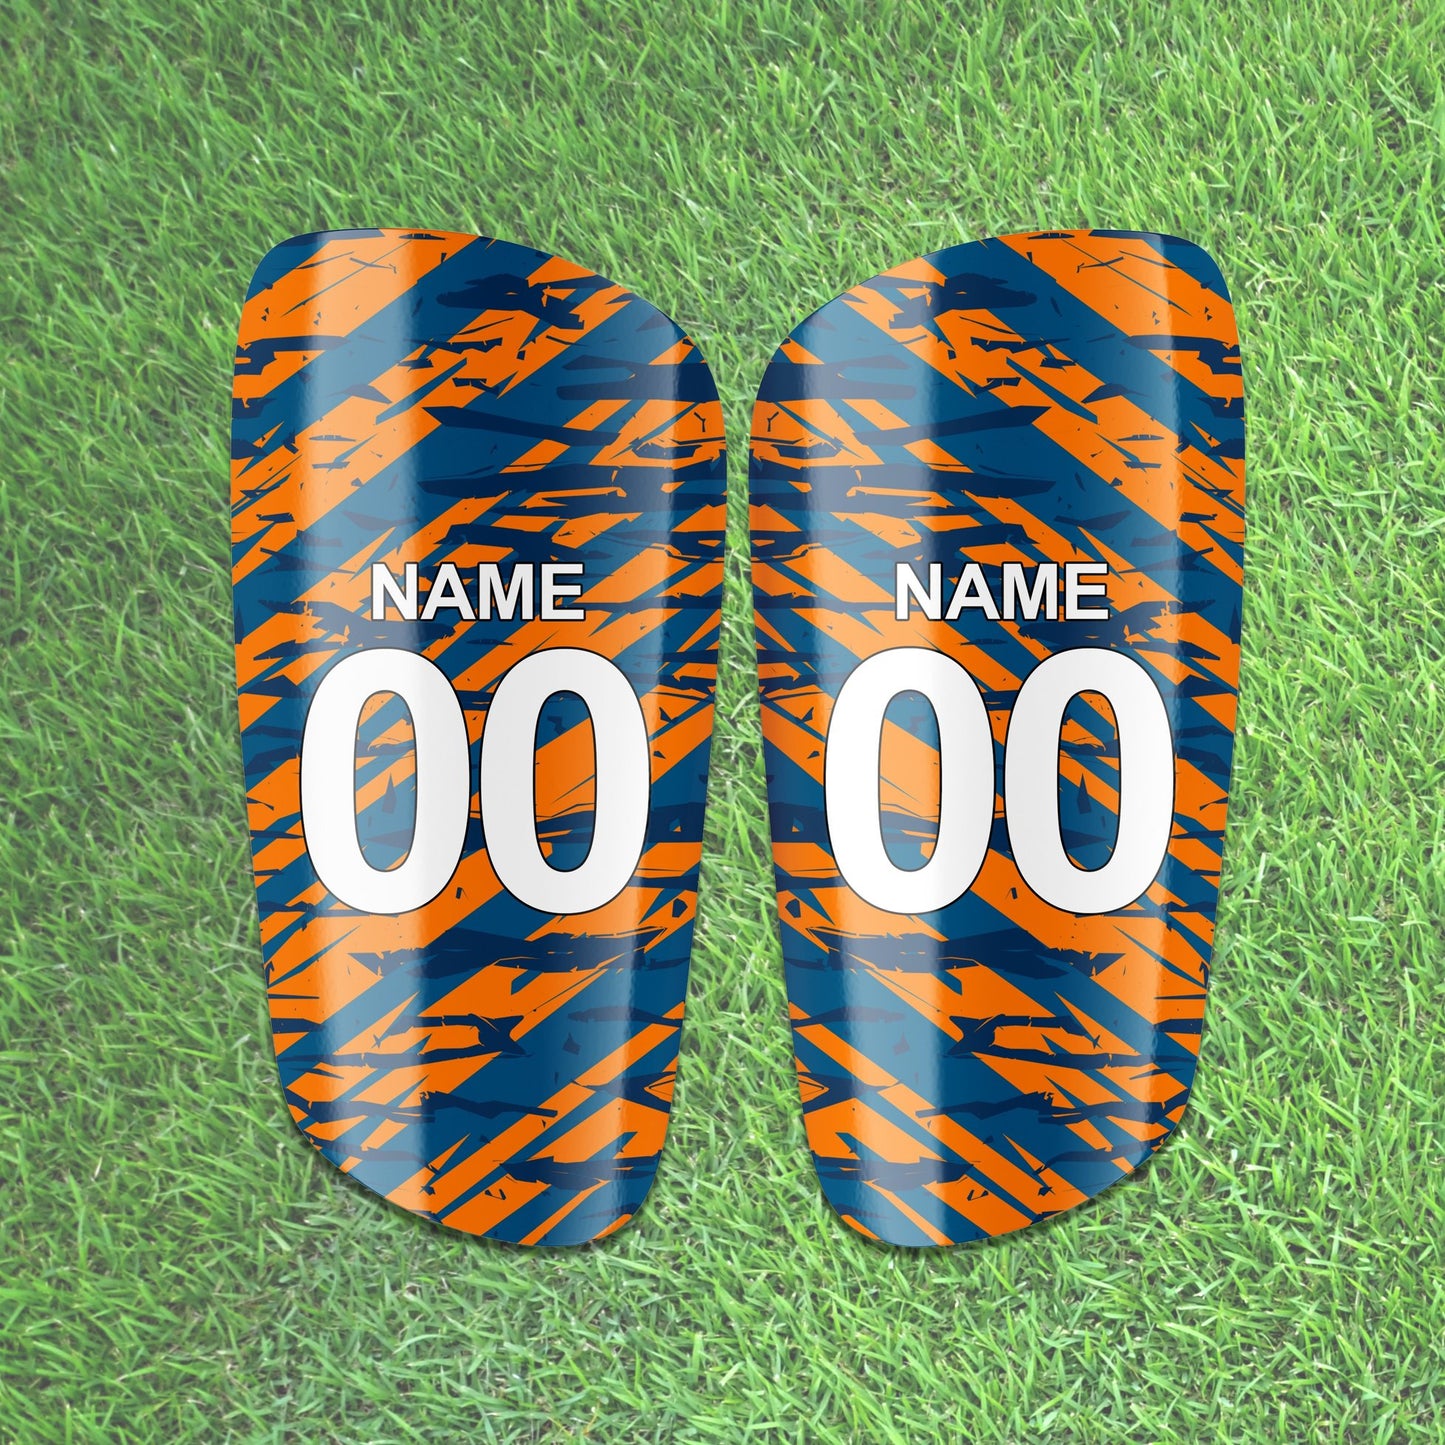 Champion's Guard Personalised Shin Pads in Orange and Blue - Noons UK